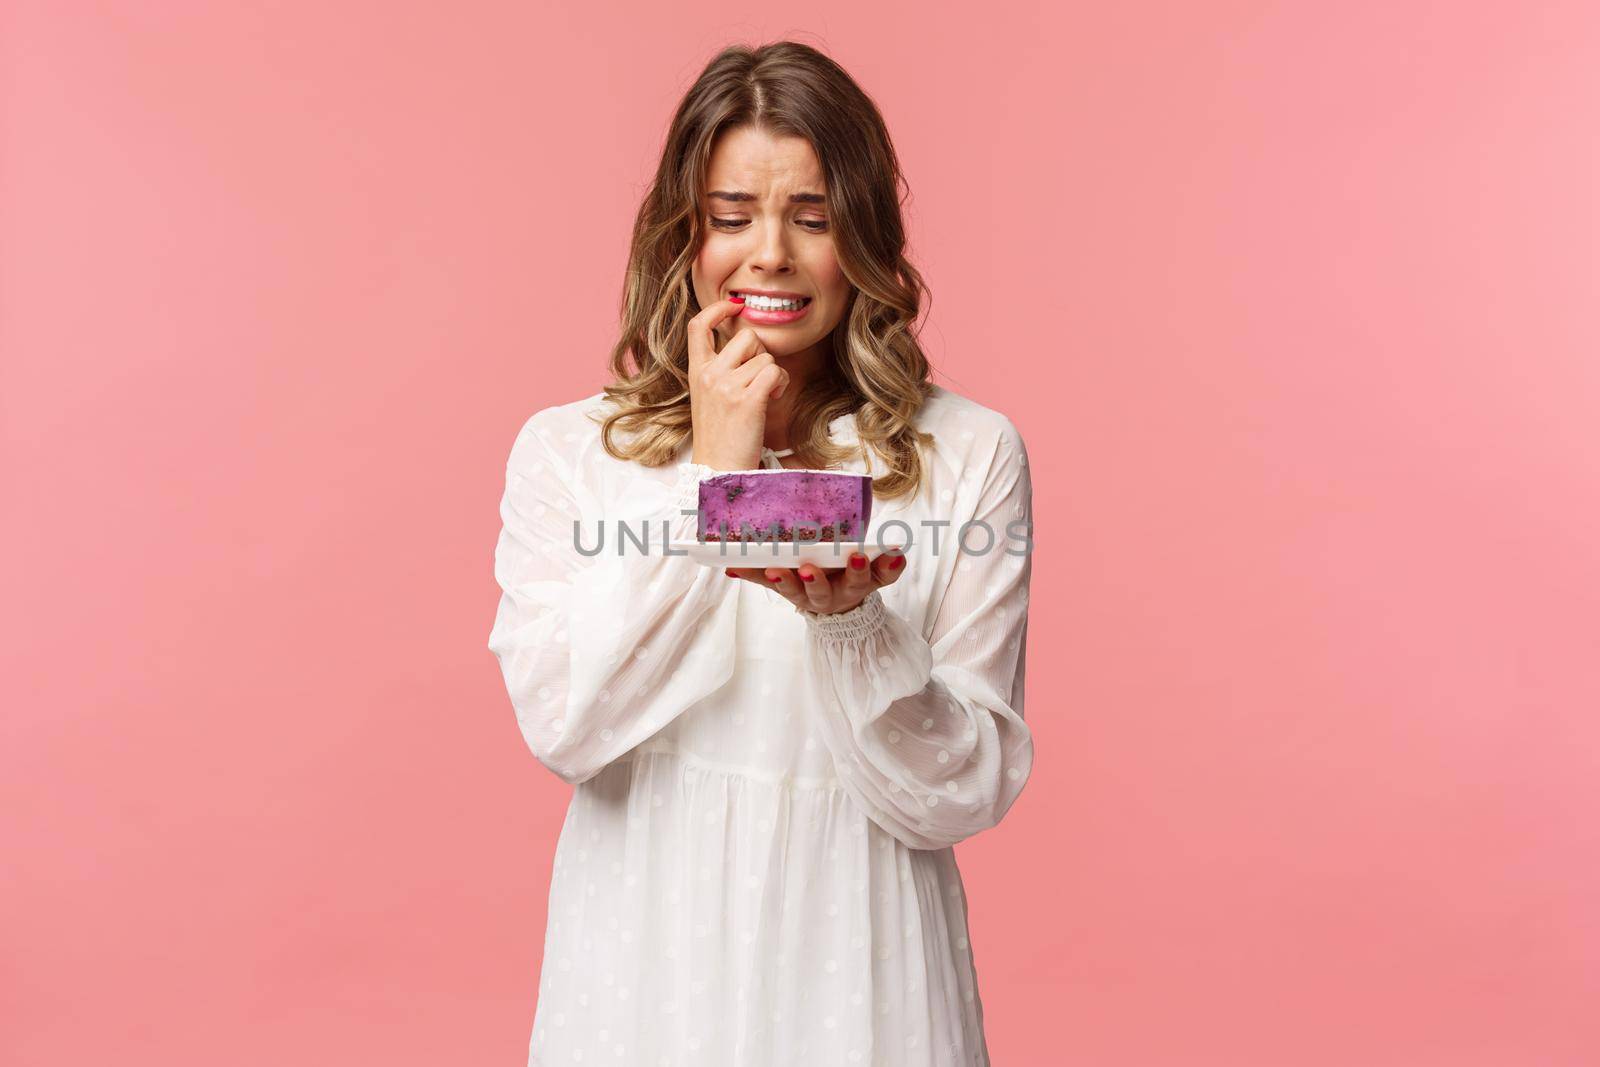 Holidays, spring and party concept. Portrait of nervous blond girl on diet, biting lip cant resist temptation to eat delicious cake, looking at dessert with hesitant expression, grimacing worried.